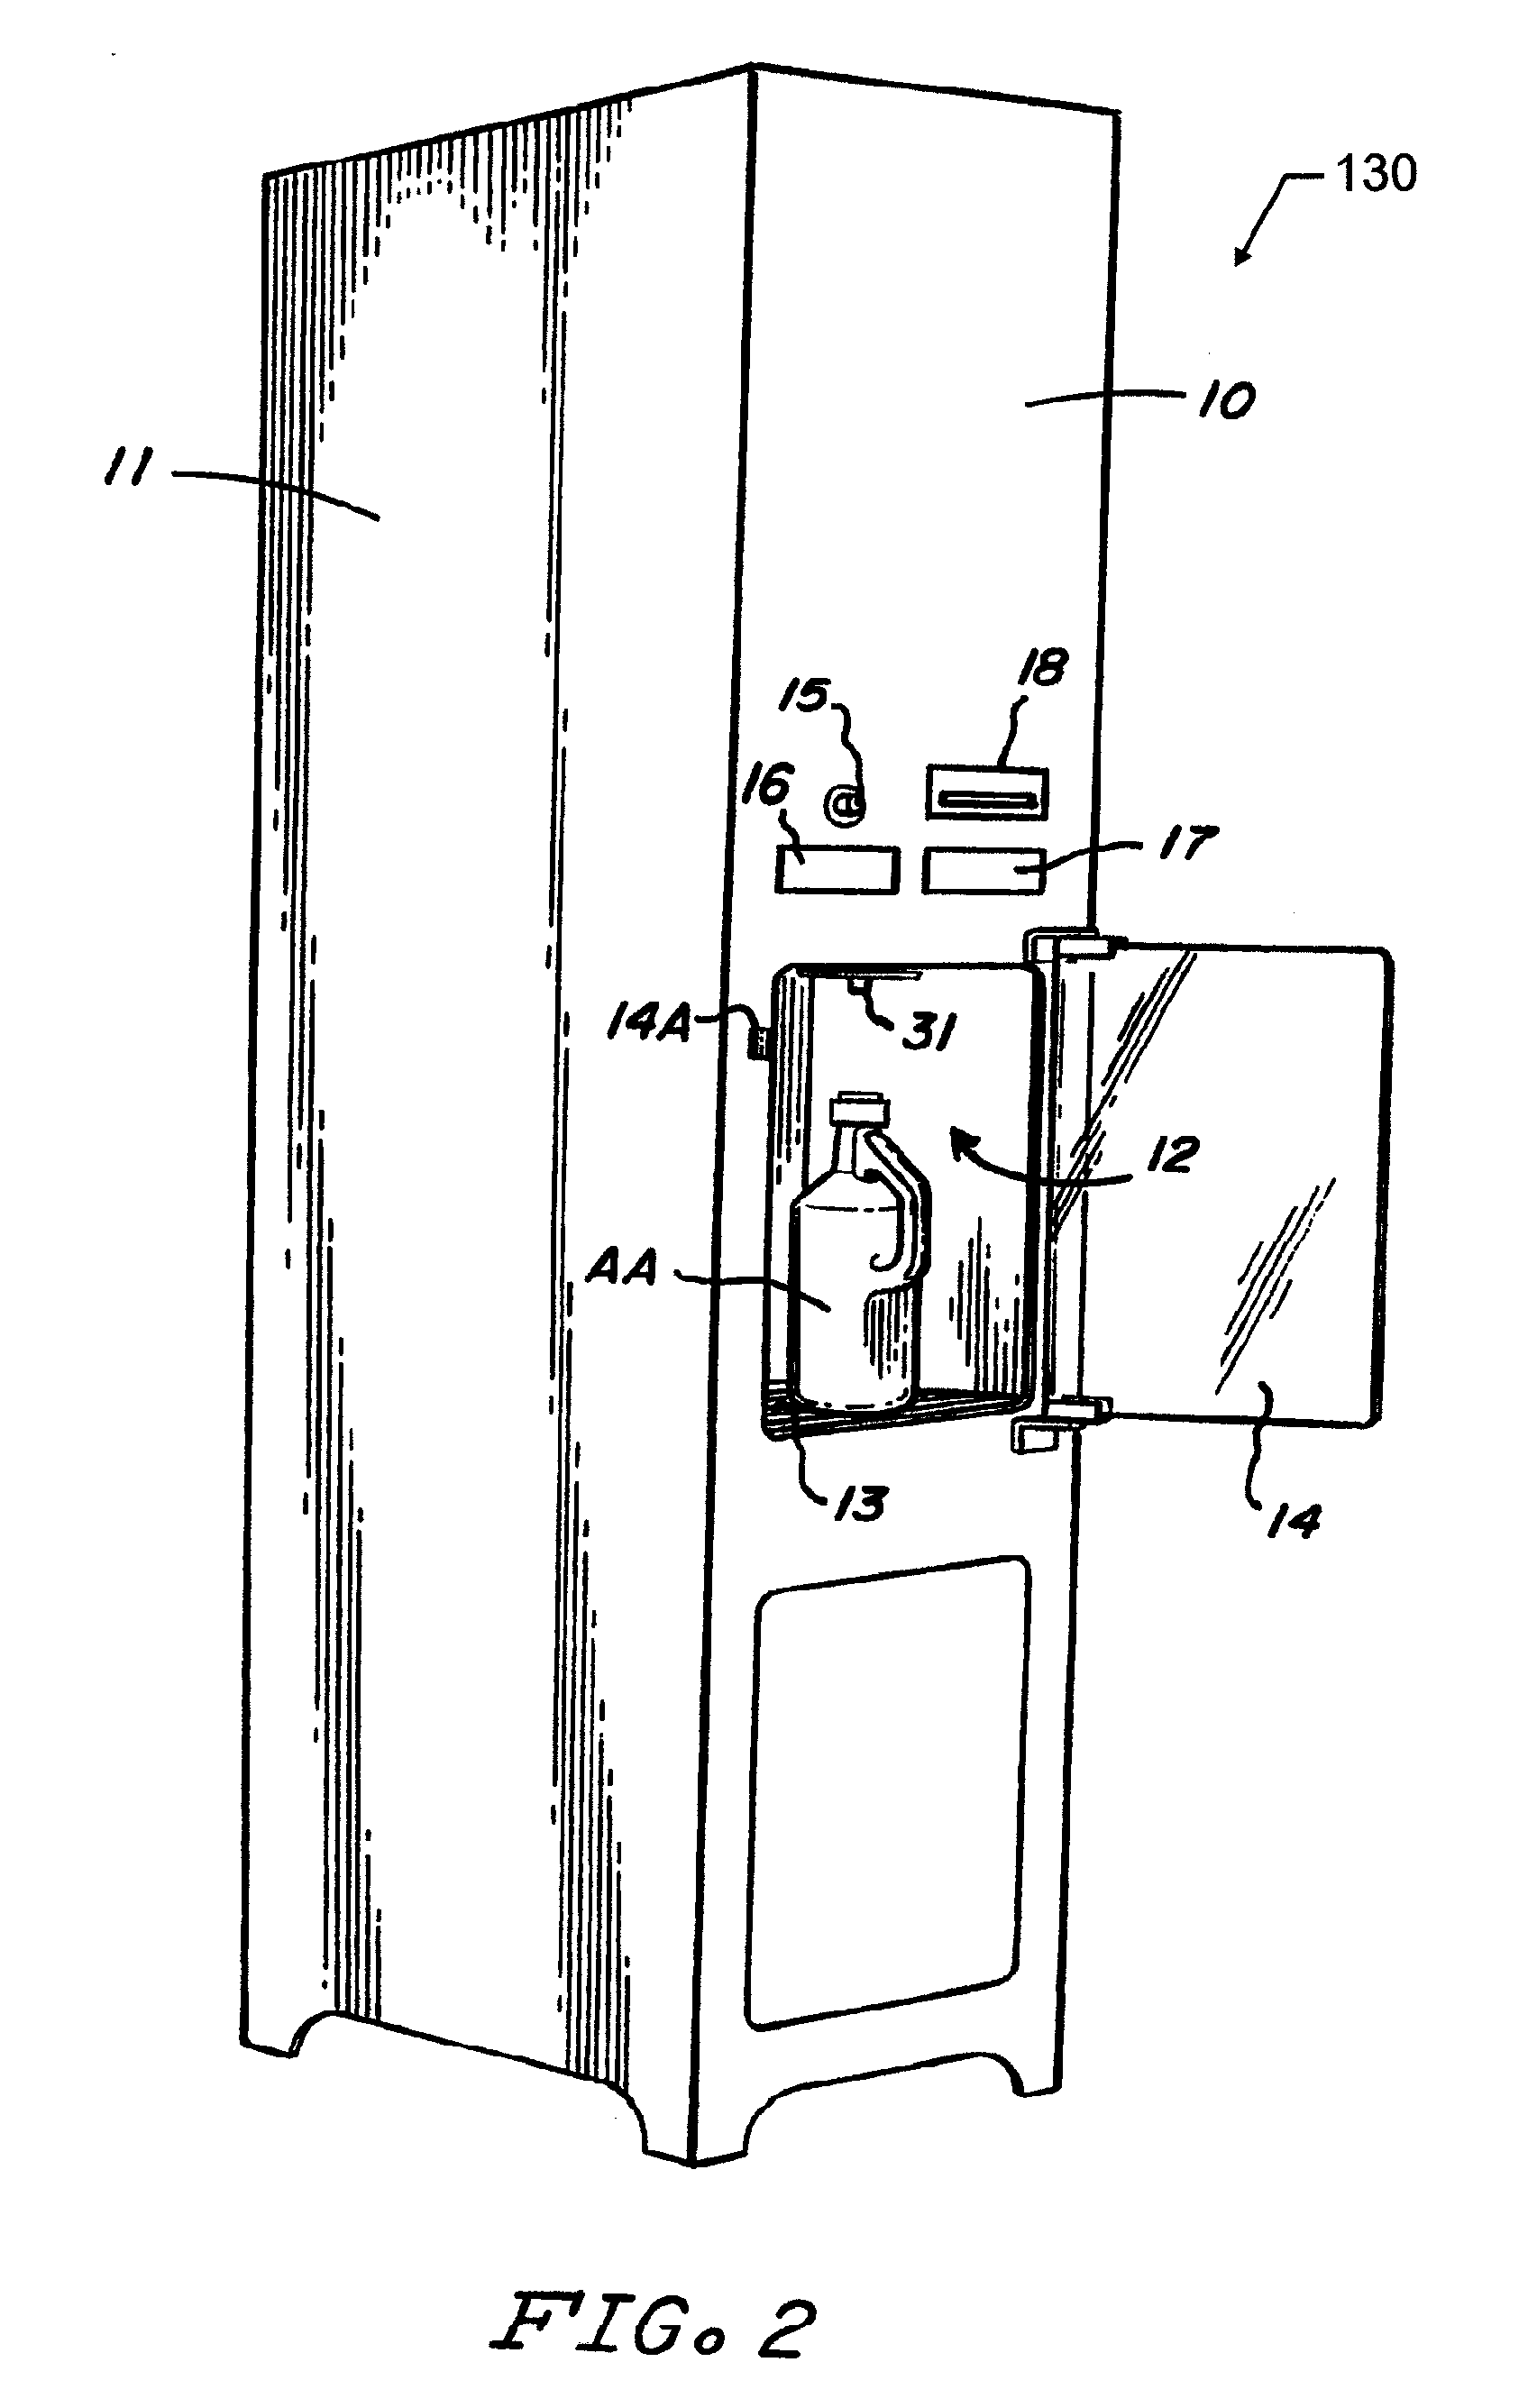 Method and Apparatus for Vending a Containerized Liquid Product Utilizing an Automatic Self-Service Refill System